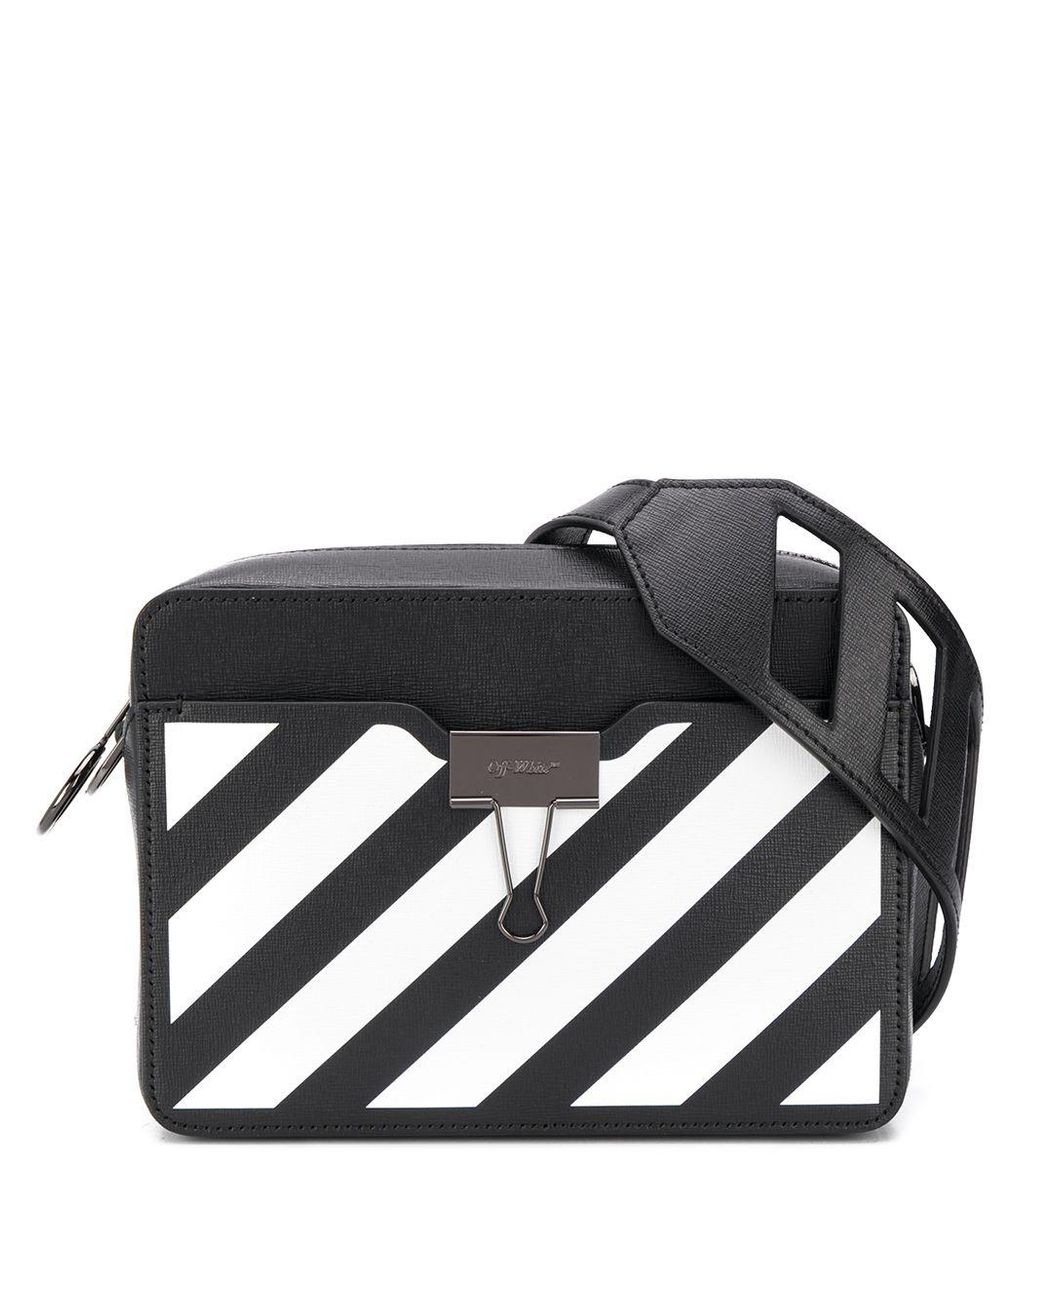 Off-White c/o Virgil Abloh Synthetic Striped Camera Bag in Black - Lyst